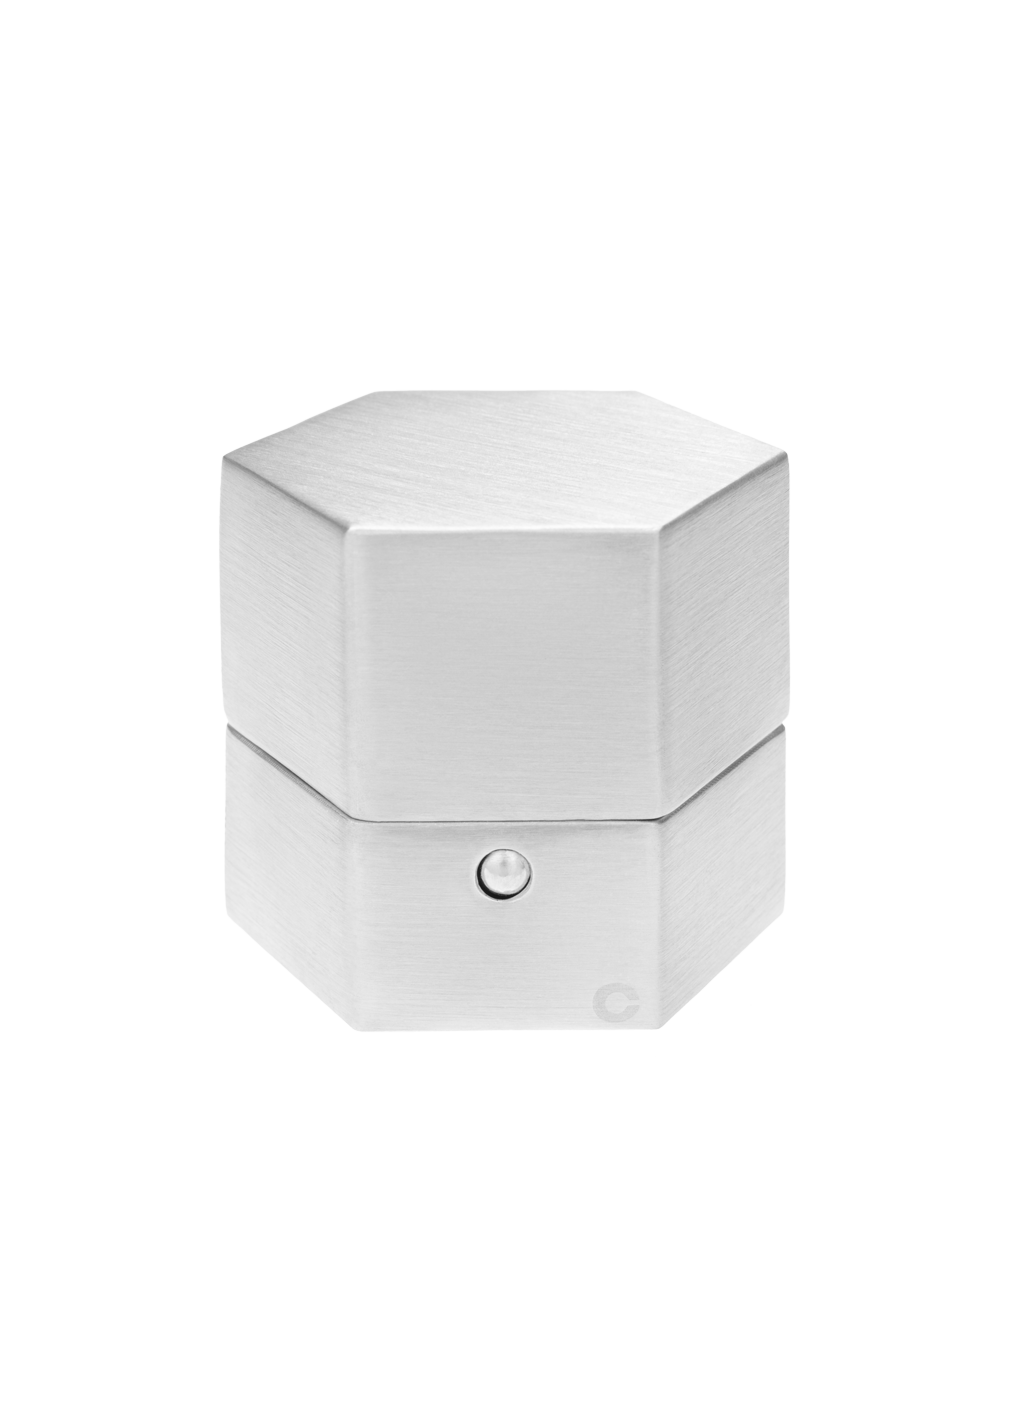 the hexagon sterling box